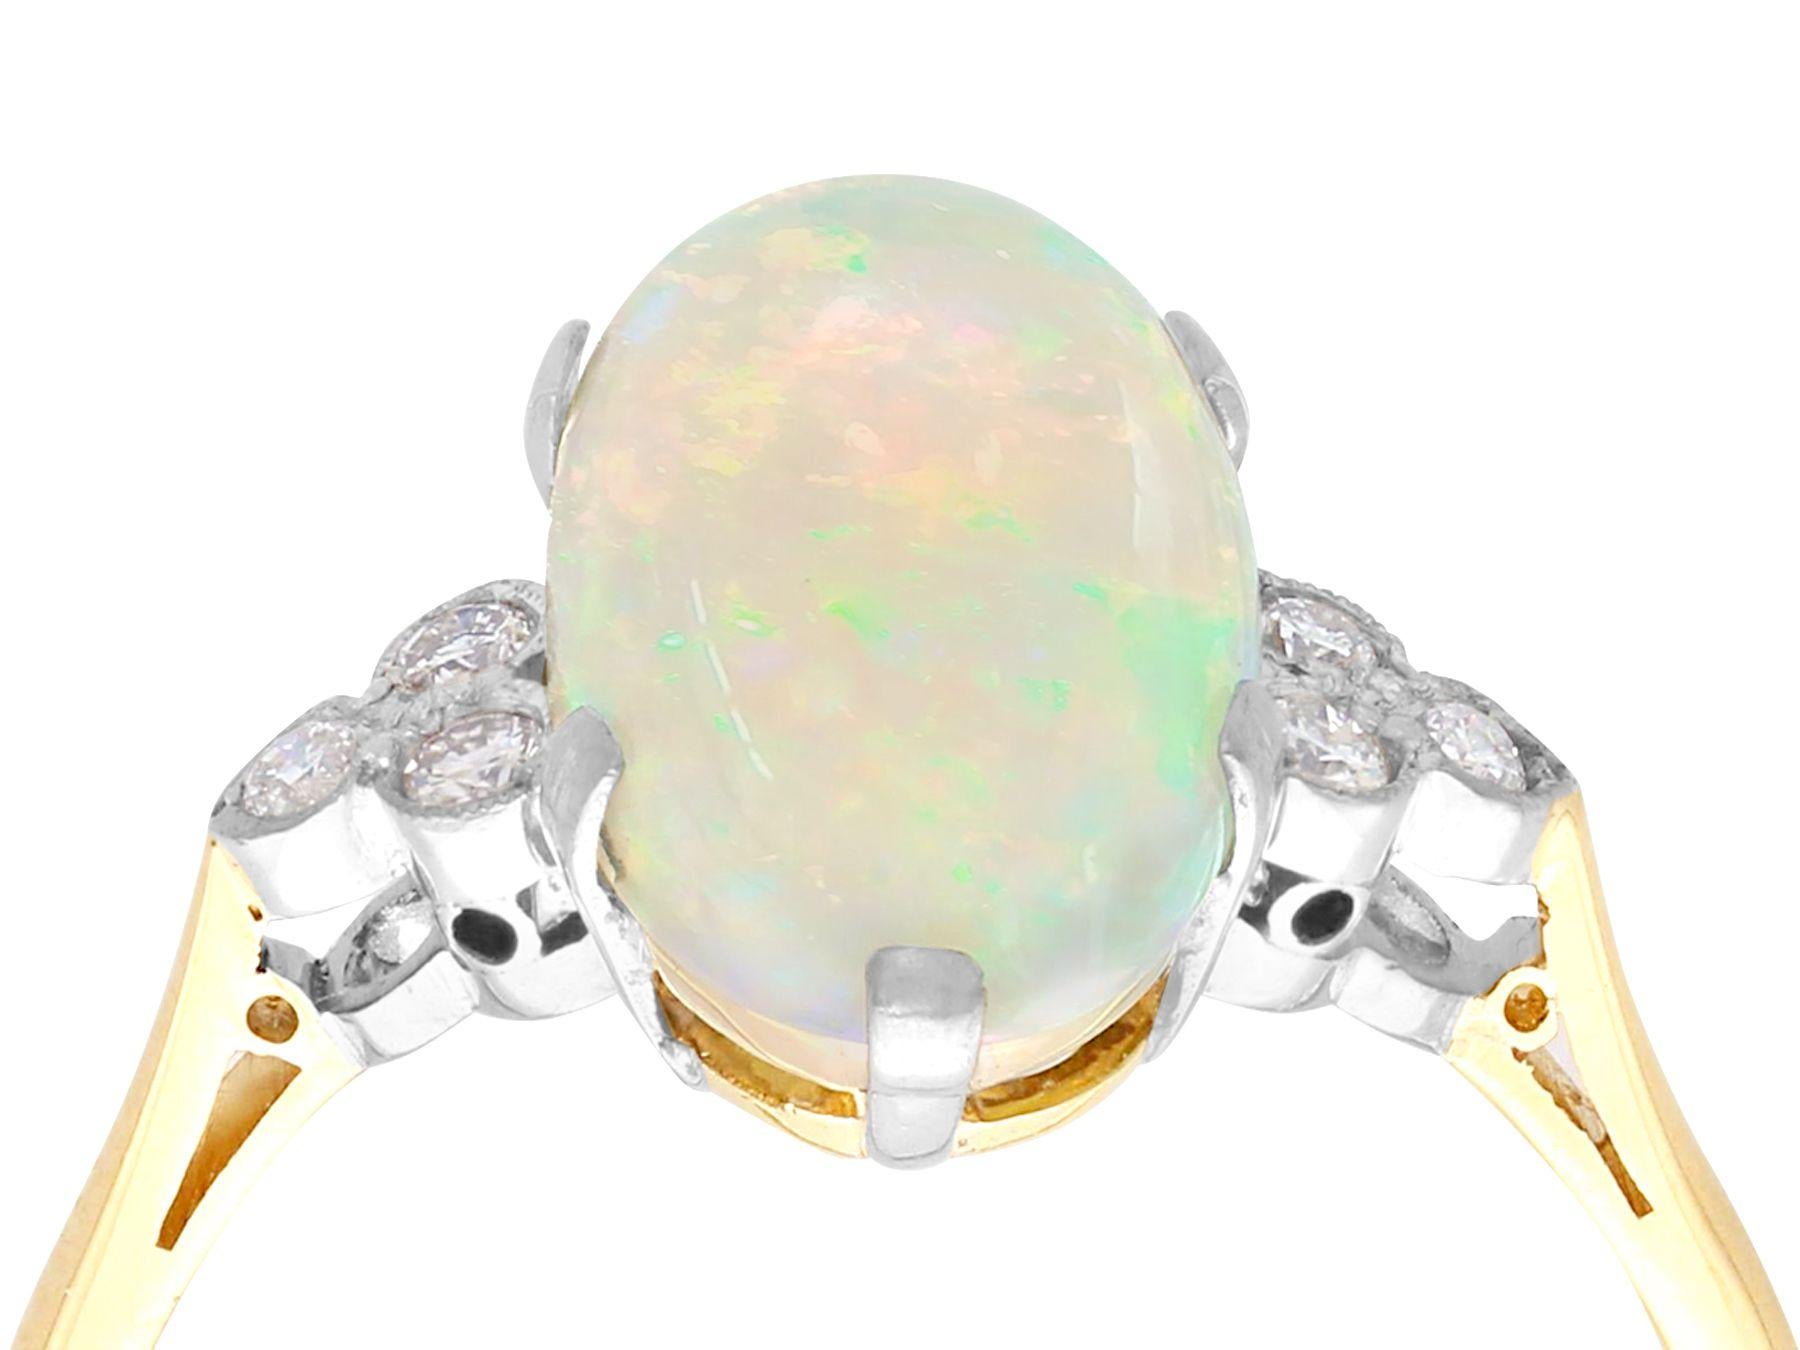 A stunning, fine and impressive vintage 3.88 Carat opal and 0.18 Carat diamond, 18 karat yellow gold and platinum set dress ring; part of our diverse vintage jewelry and estate jewelry collections.

This stunning vintage opal and diamond ring has